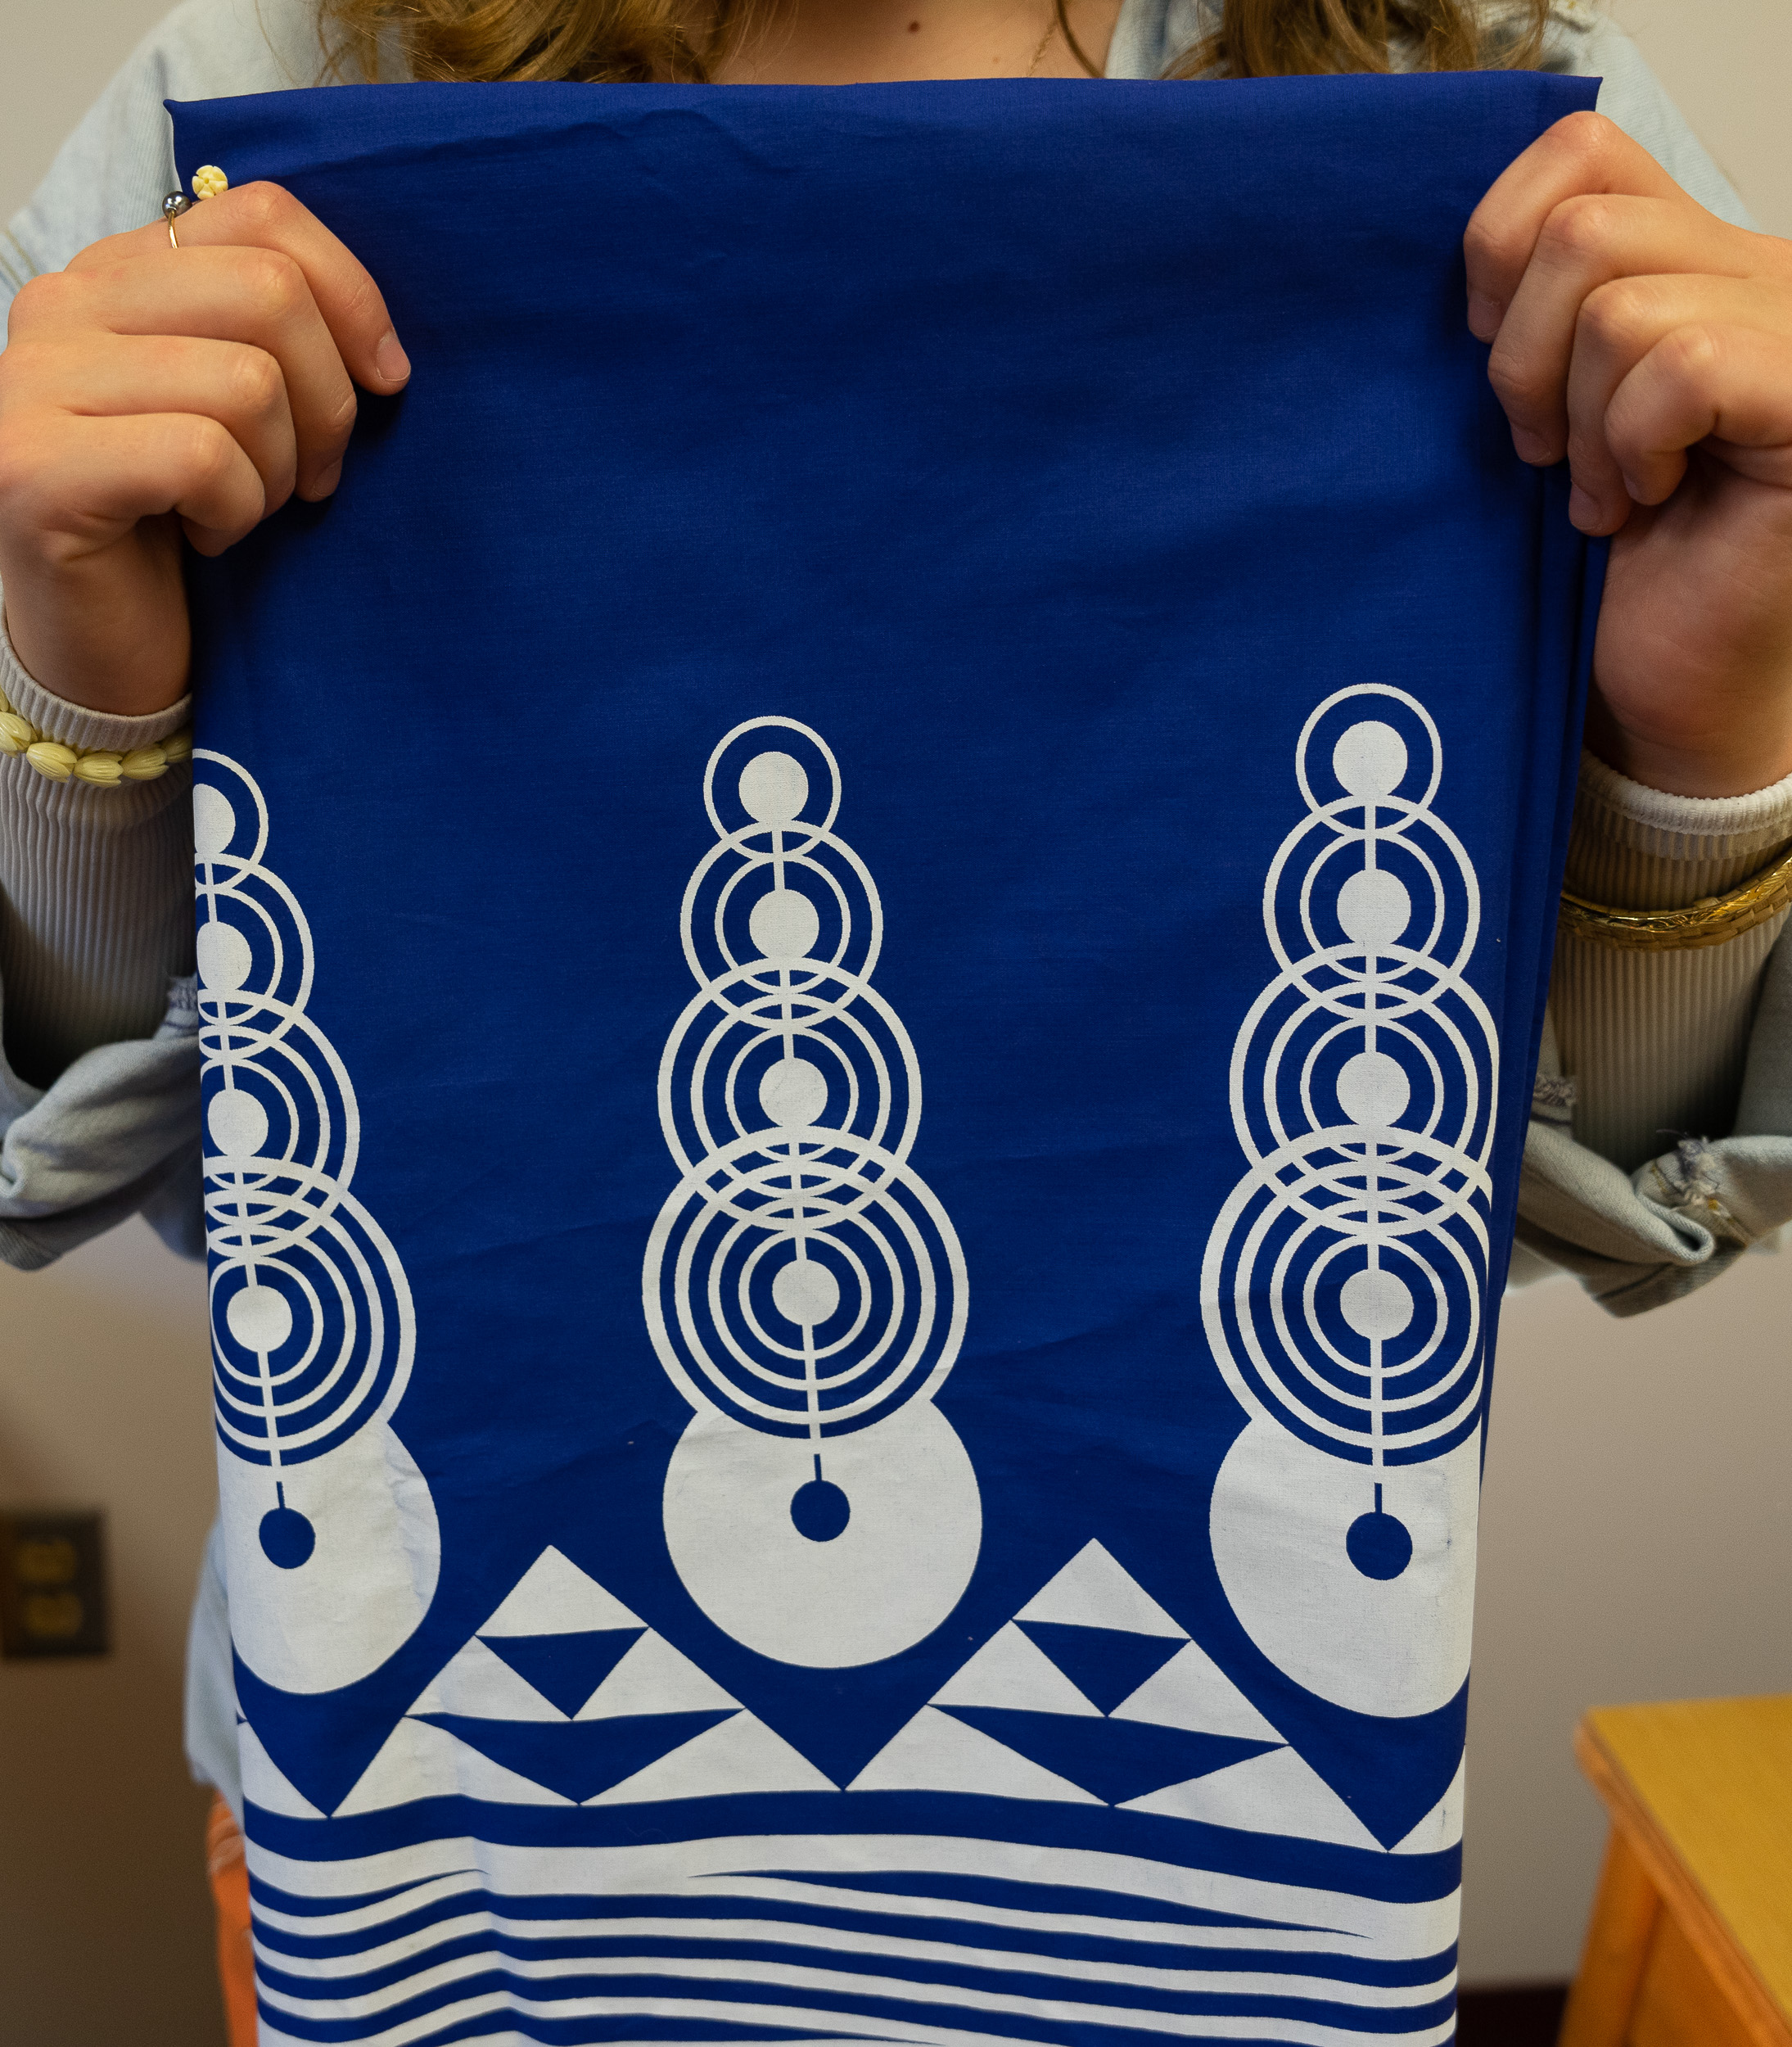 A woman’s hands hold up a blue fabric garment with white patterns on it.